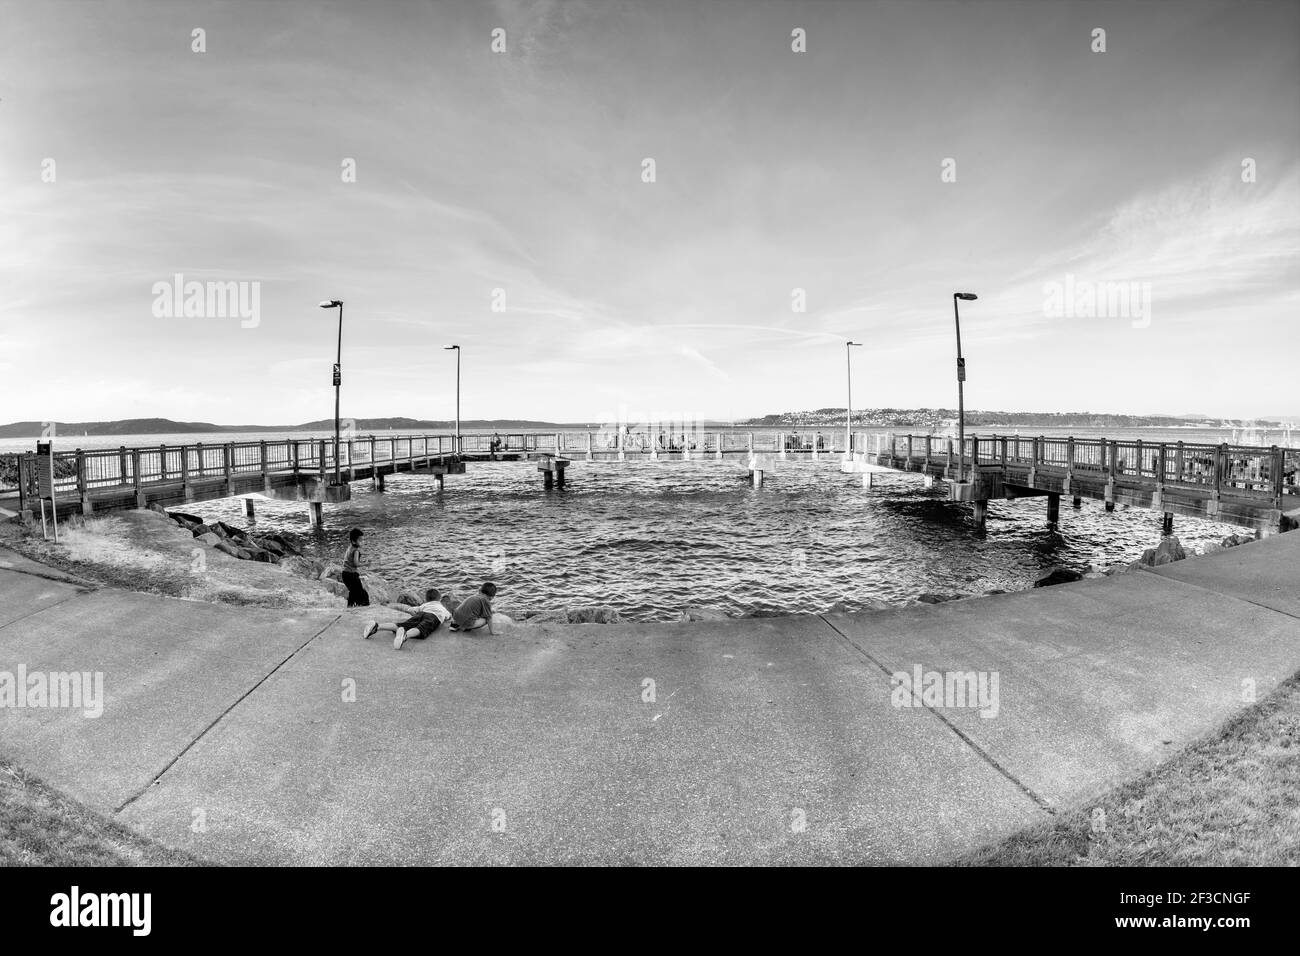 The pier at Marine (Jack Tanner) Park in Tacoma, WA with fishermen on a Friday night. Stock Photo